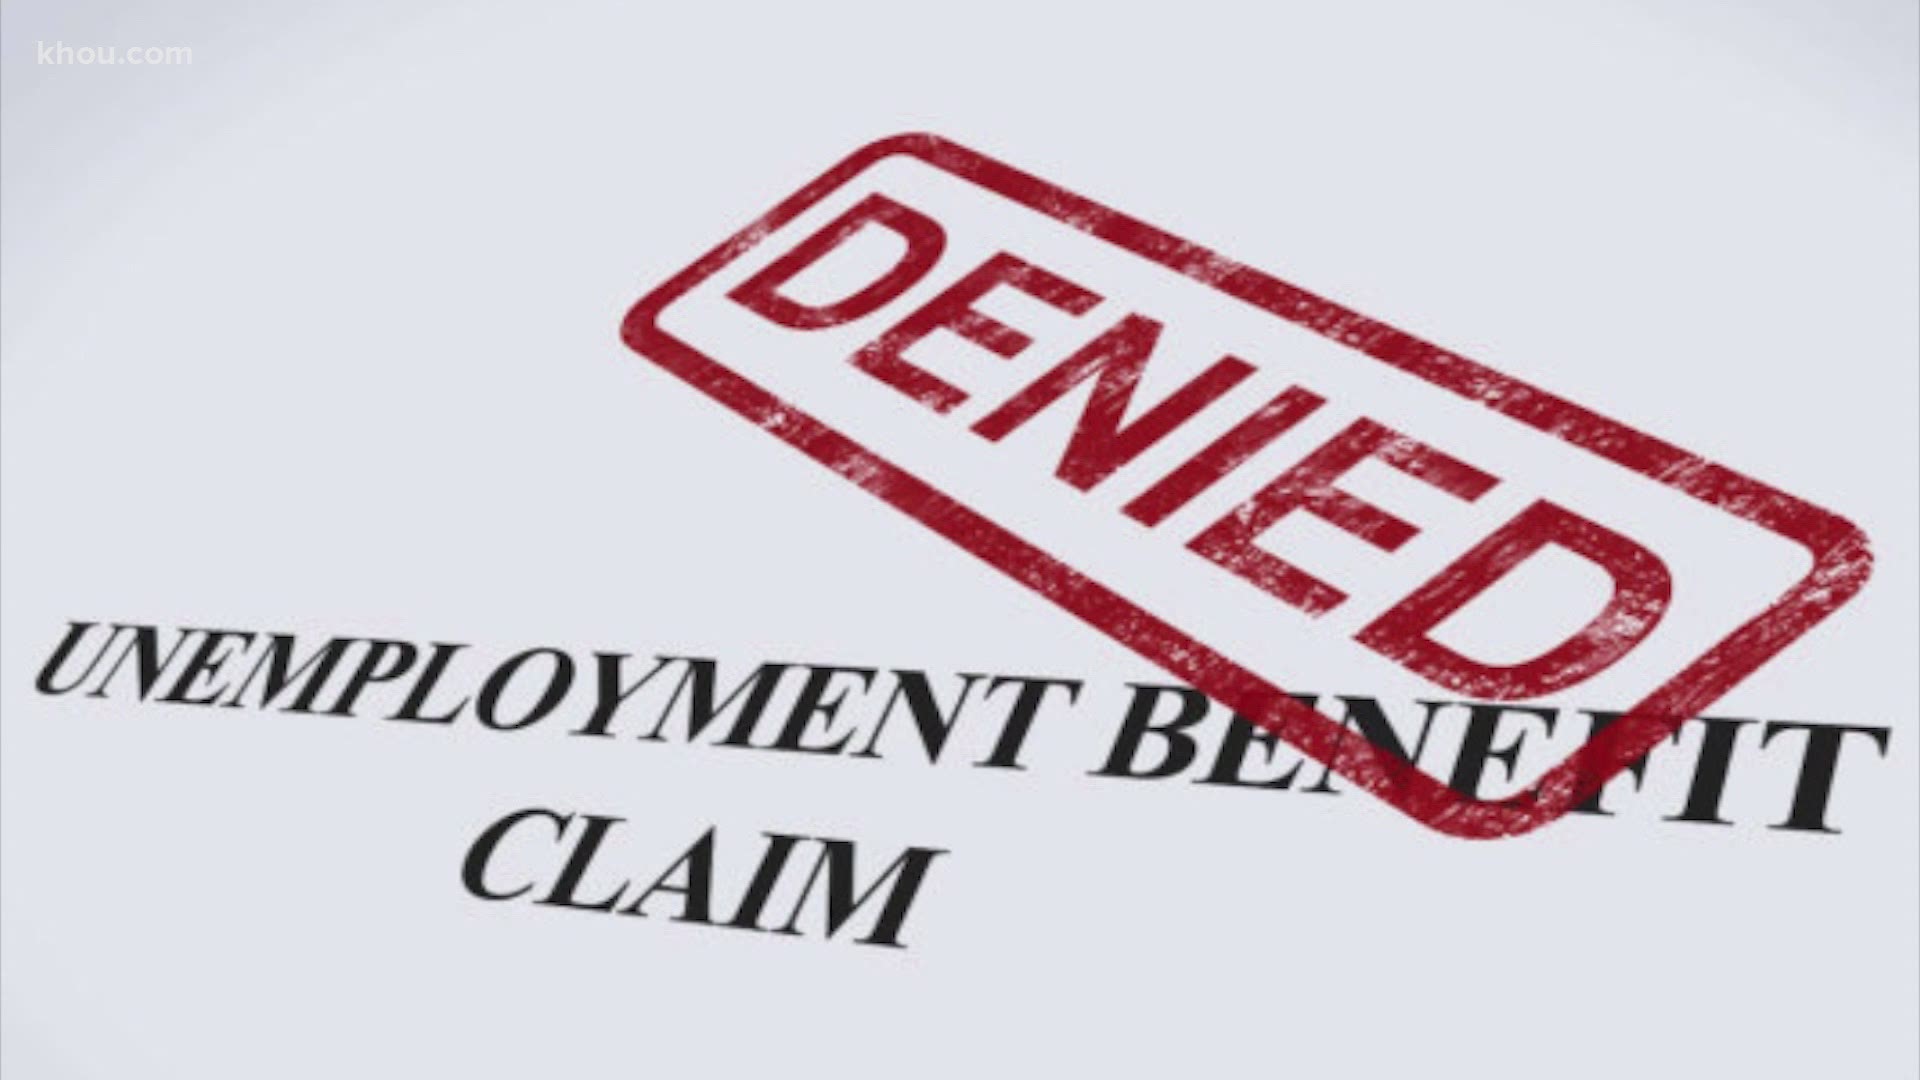 Many people who've applied for unemployment have hit another snag: they've been denied or nothing has shown up!